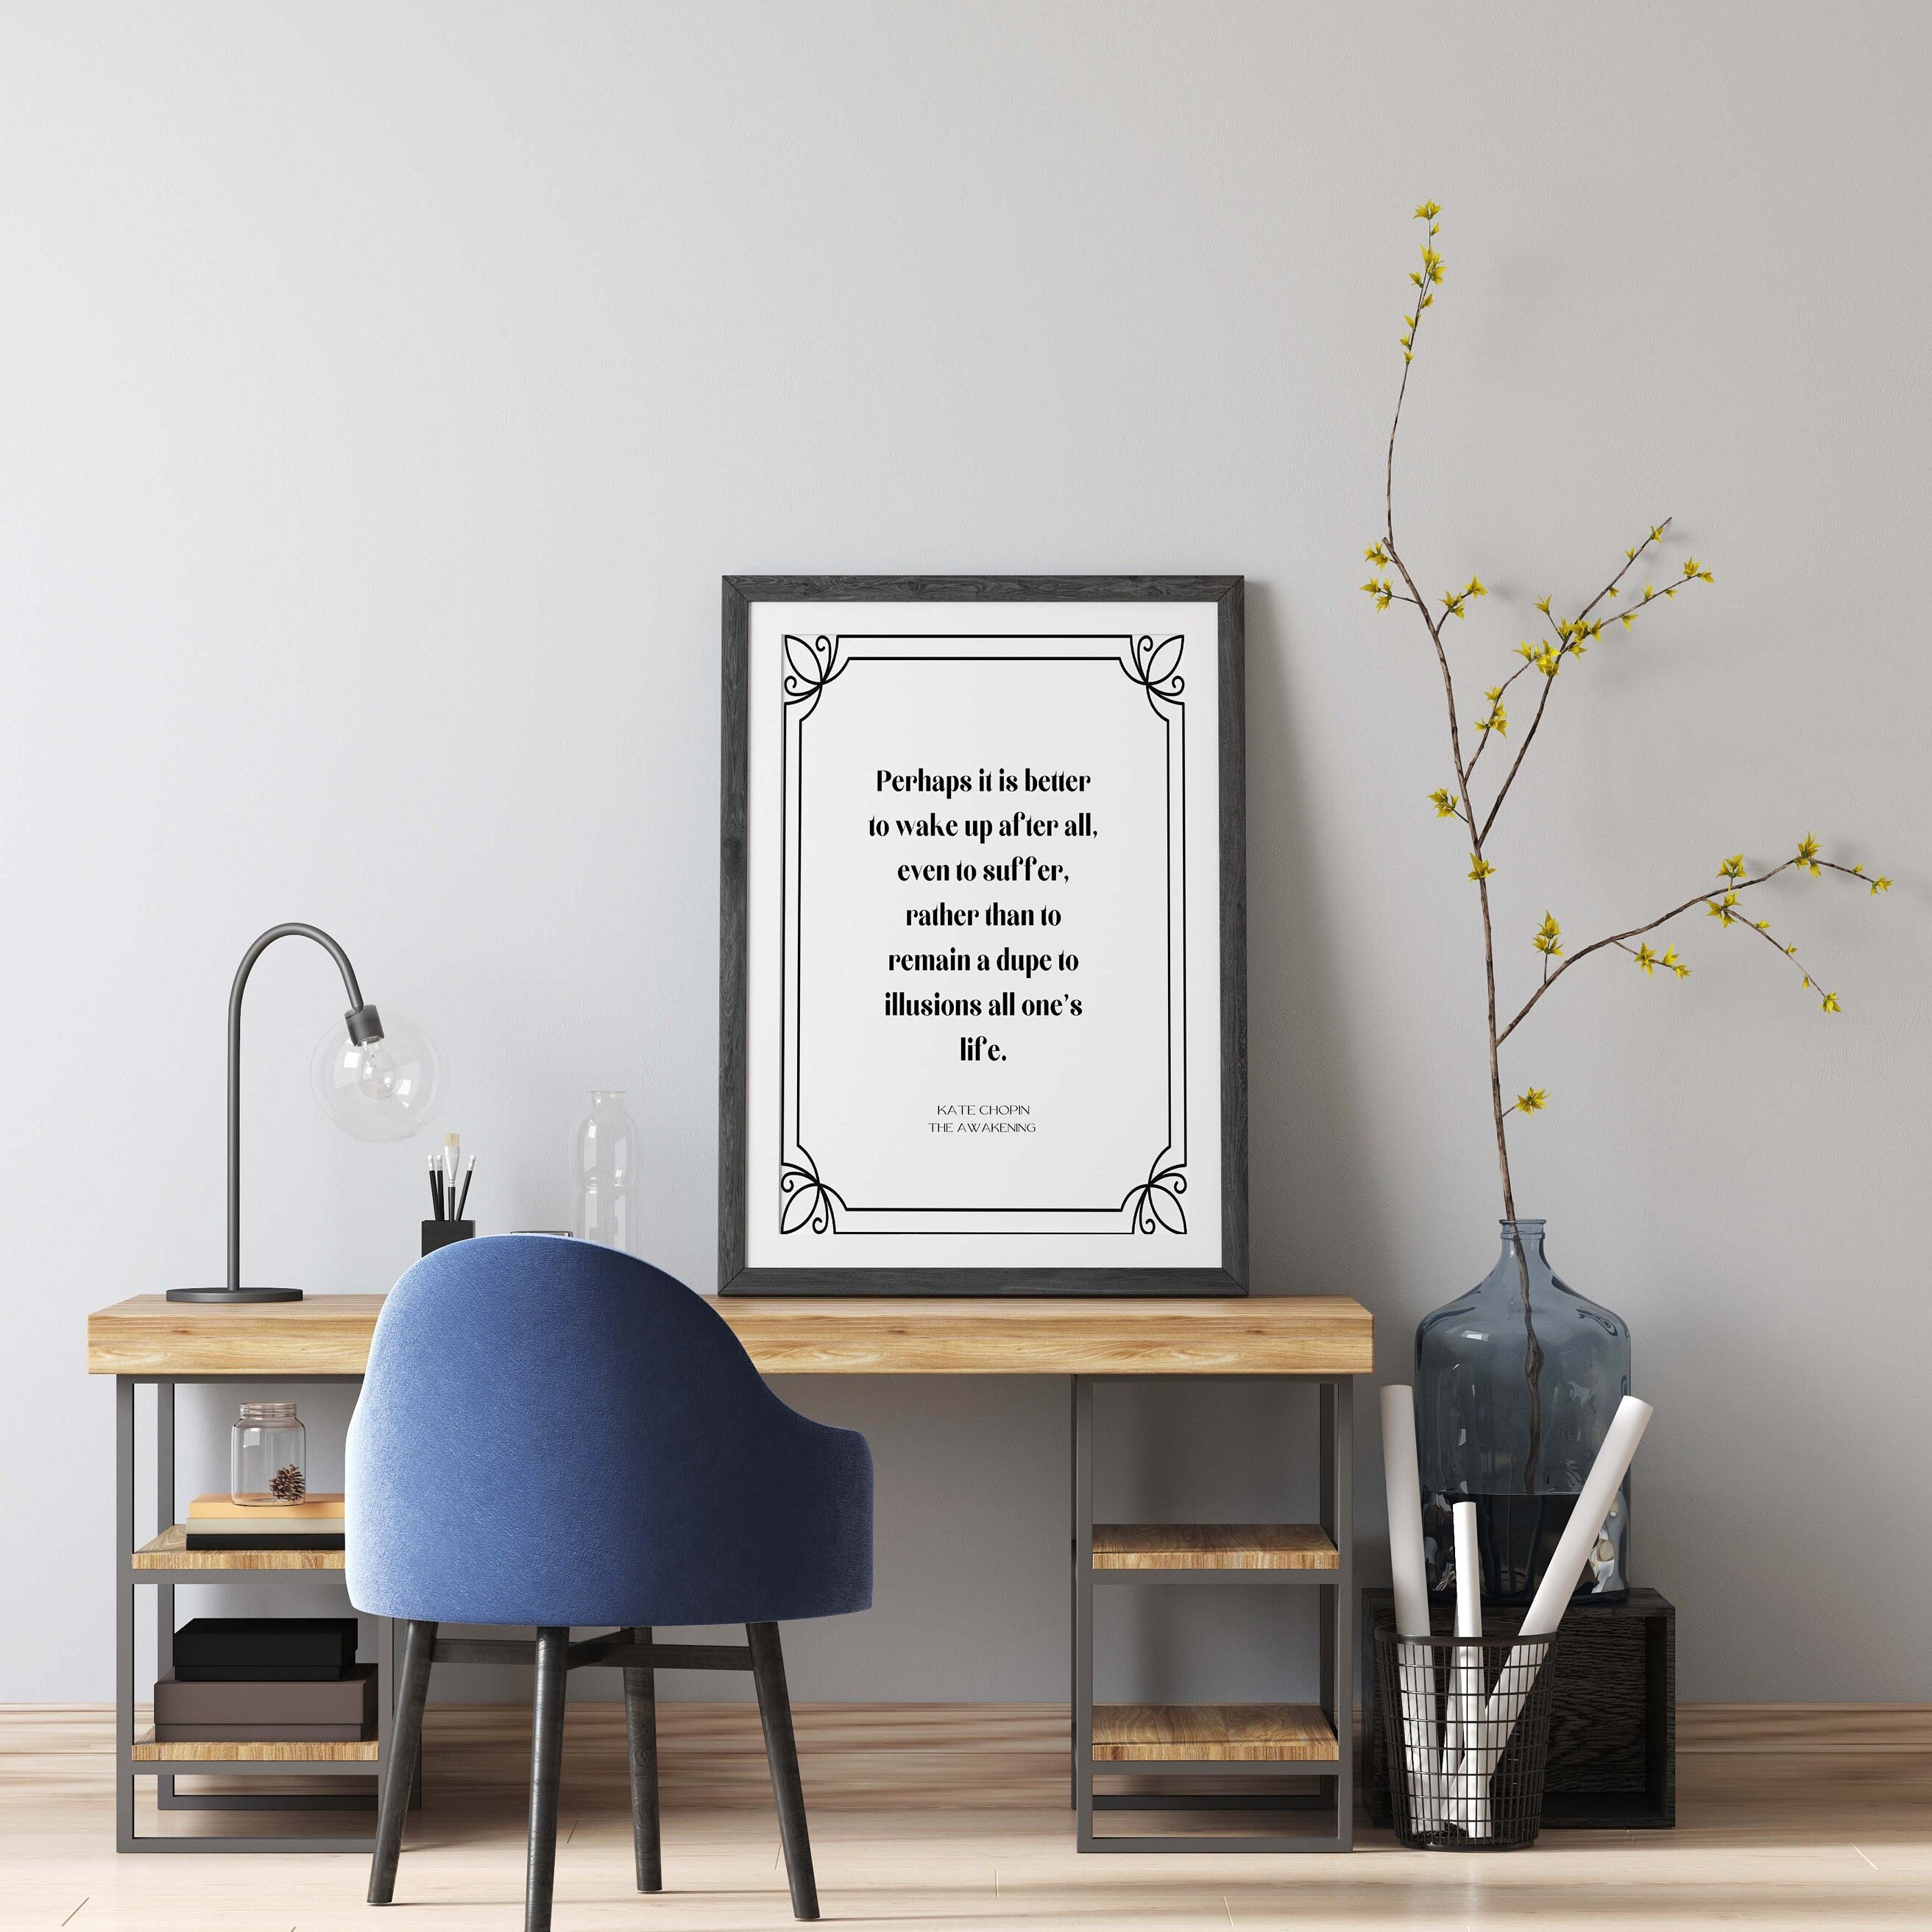 Kate Chopin The Awakening Quote Unframed Typography Print, Inspirational Print Gift in Black & White